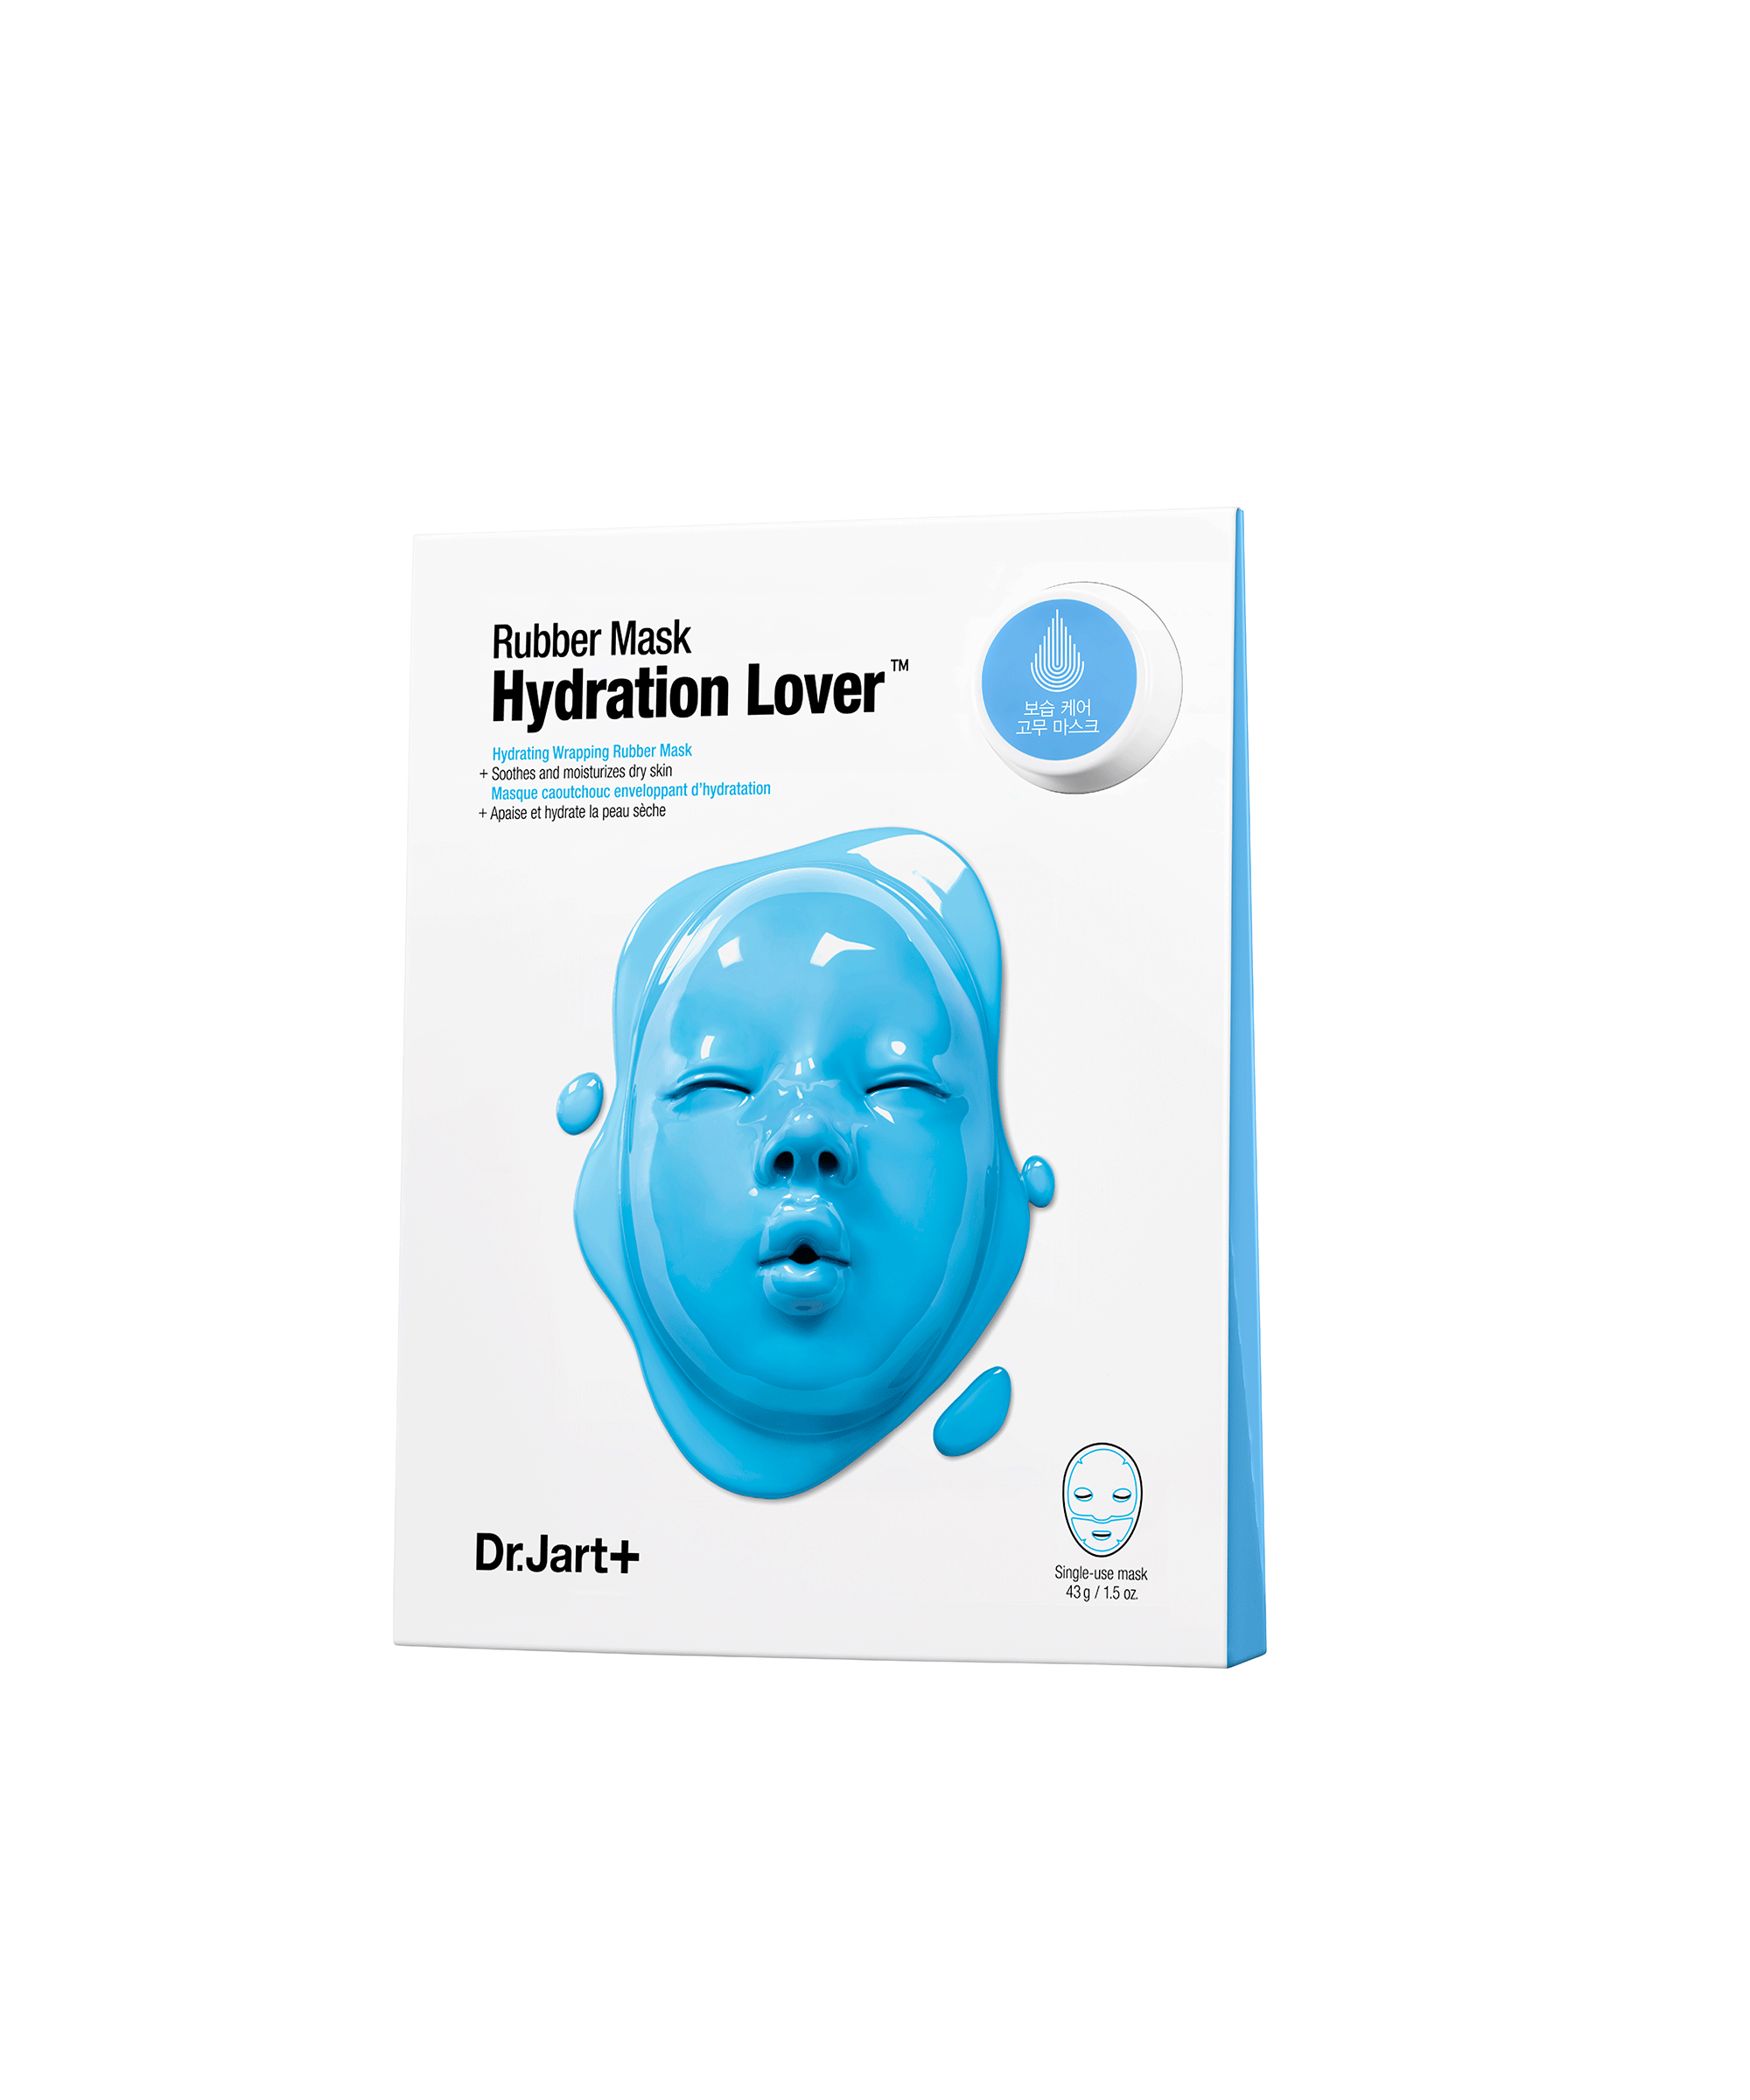 review of these popular rubber masks